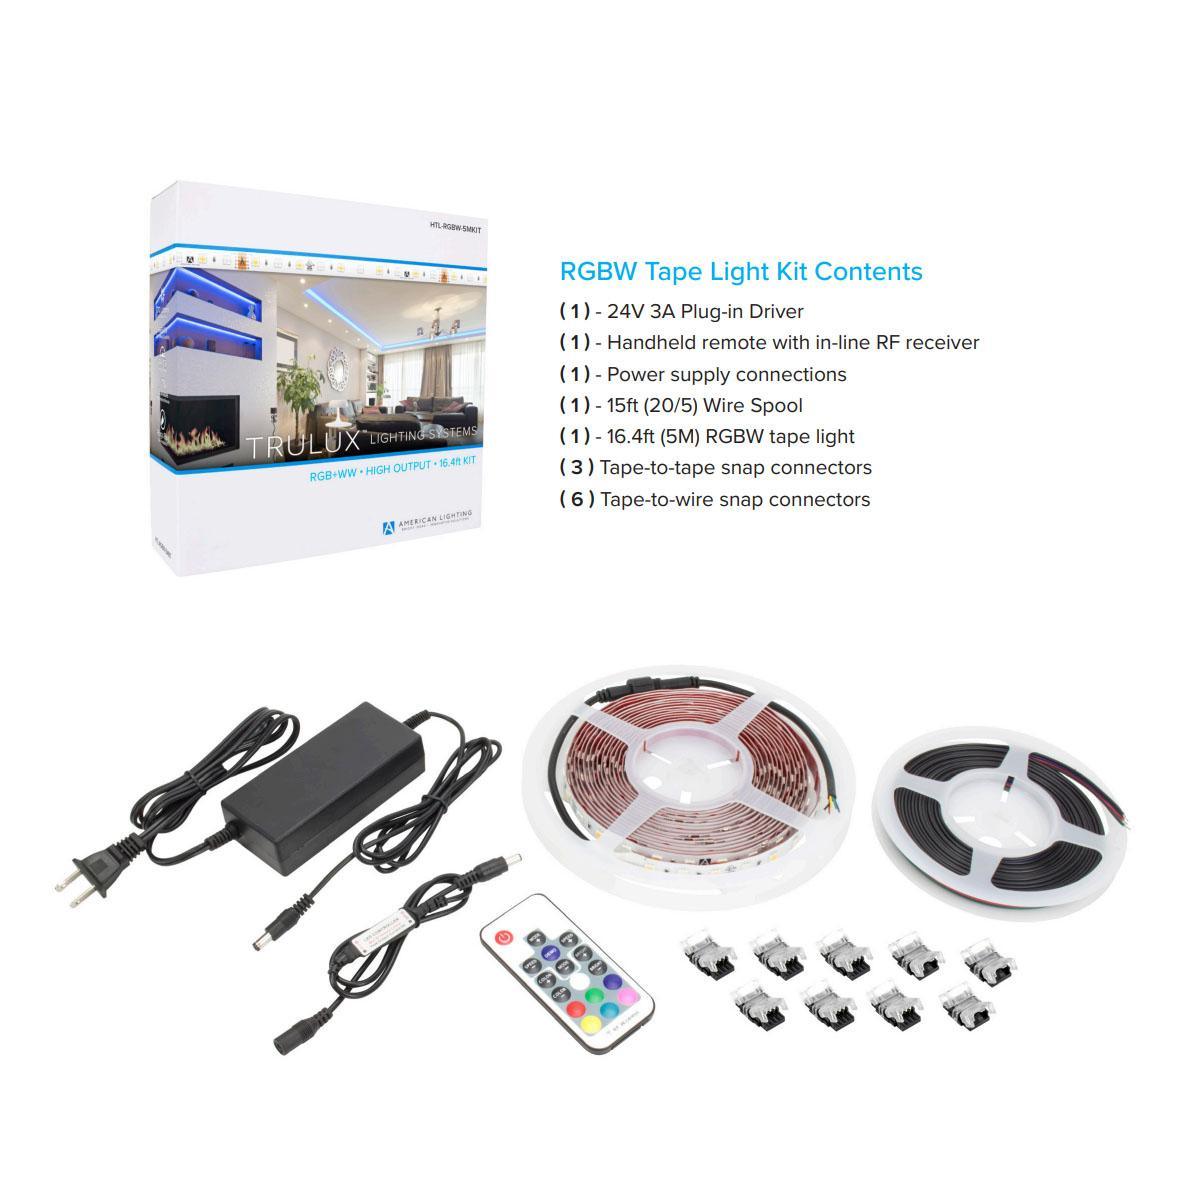 Trulux High Output LED Strip Light Kit with Remote control, 16.4Ft Reel with 24V DC Kit with Plug and Play Connection, RGB + 3000K, 240 Lumens per Ft - Bees Lighting